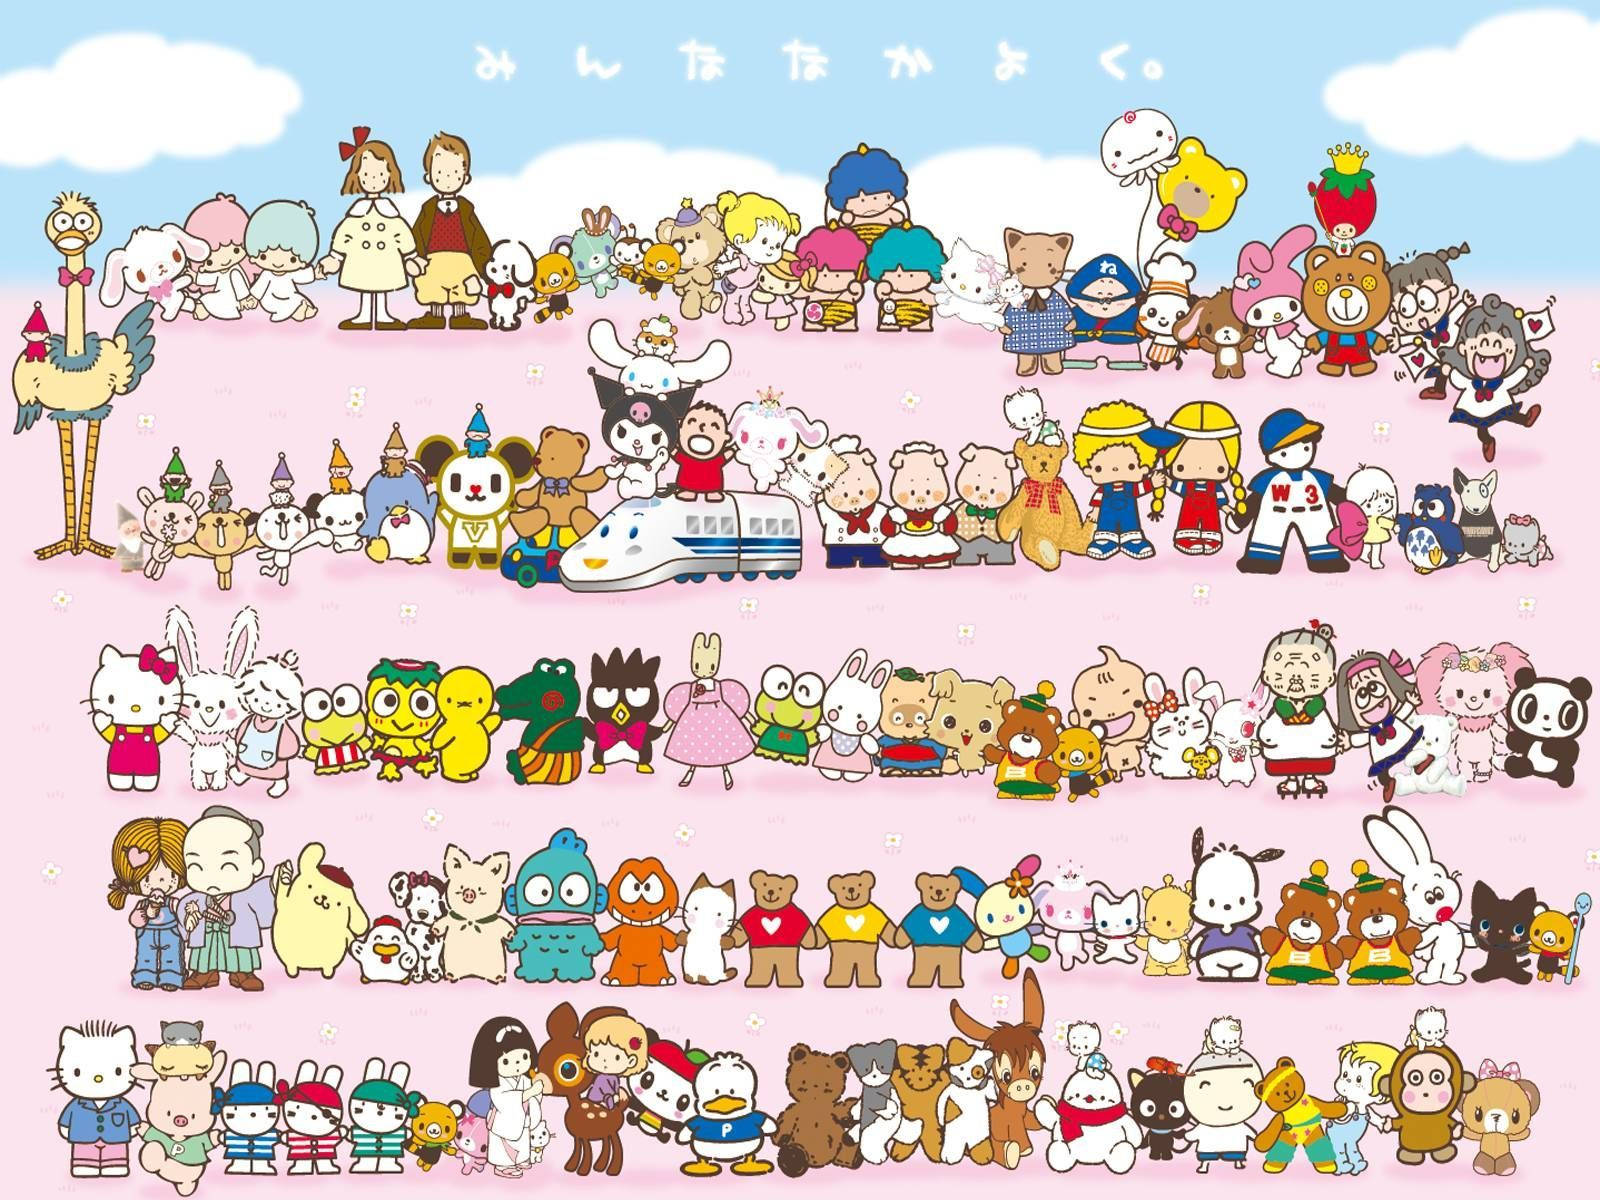 Sanrio Characters Under Blue Sky Background